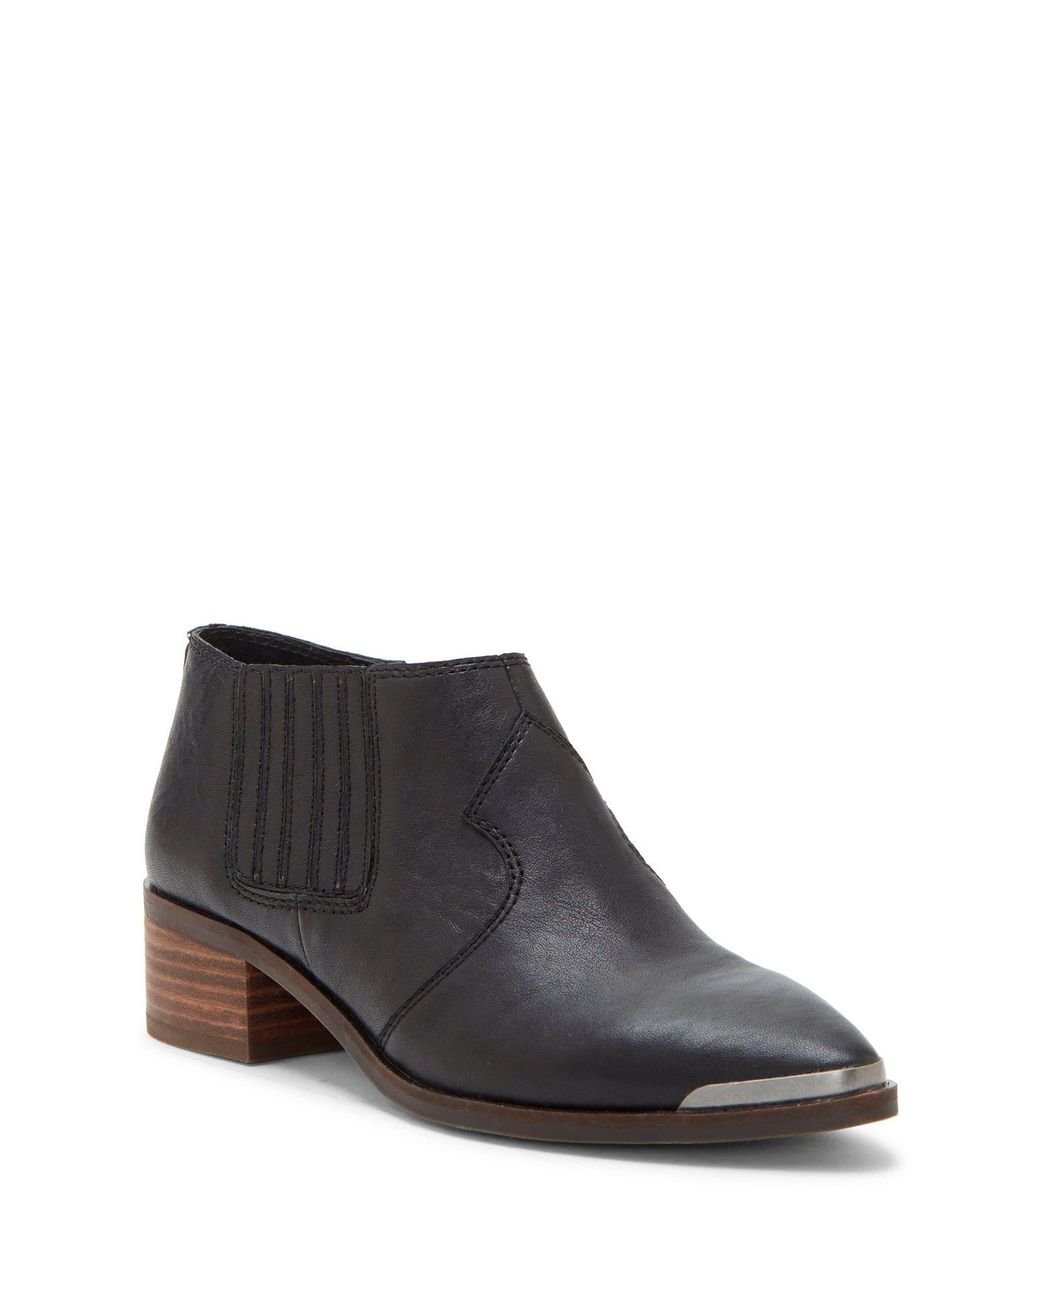 Lucky Brand Leather Kalbah Bootie in Black - Lyst